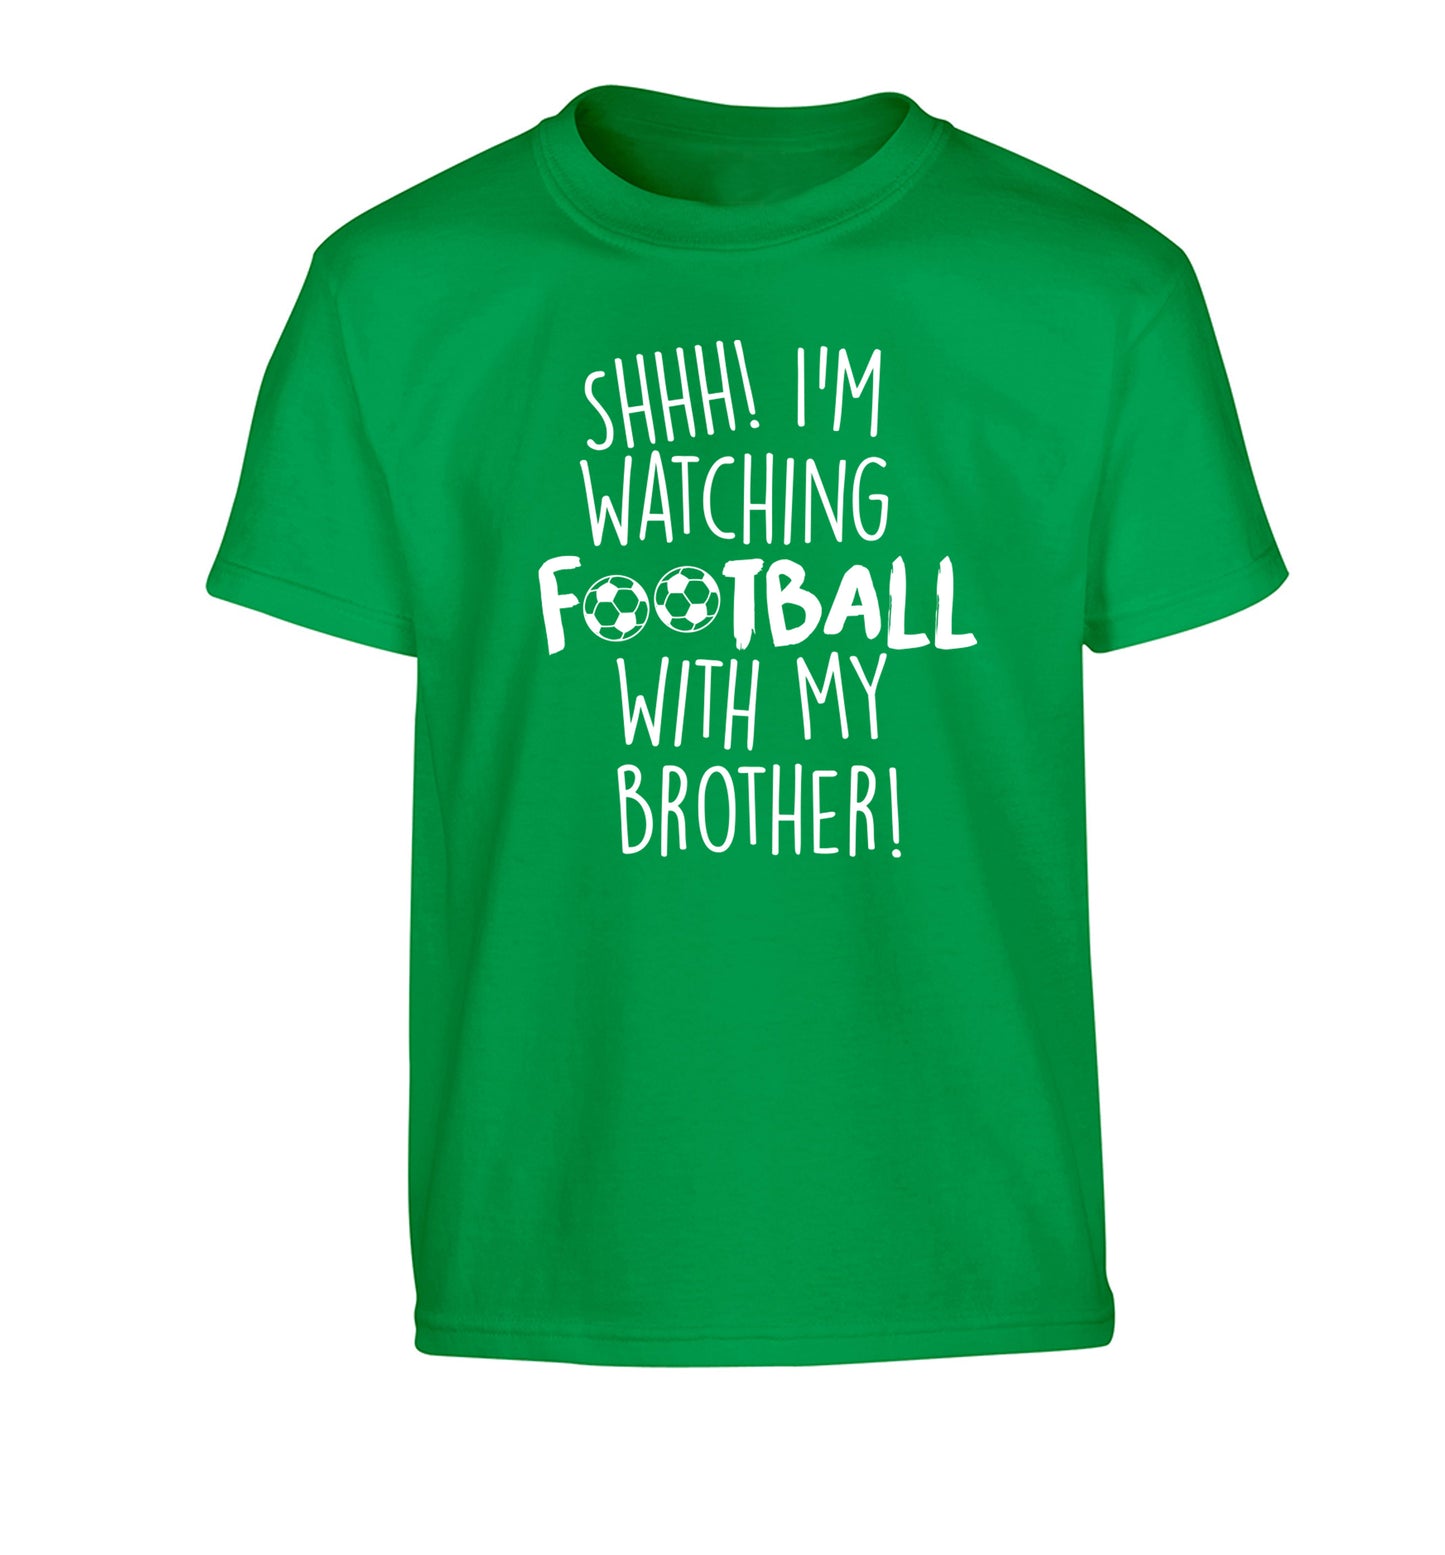 Shhh I'm watching football with my brother Children's green Tshirt 12-14 Years